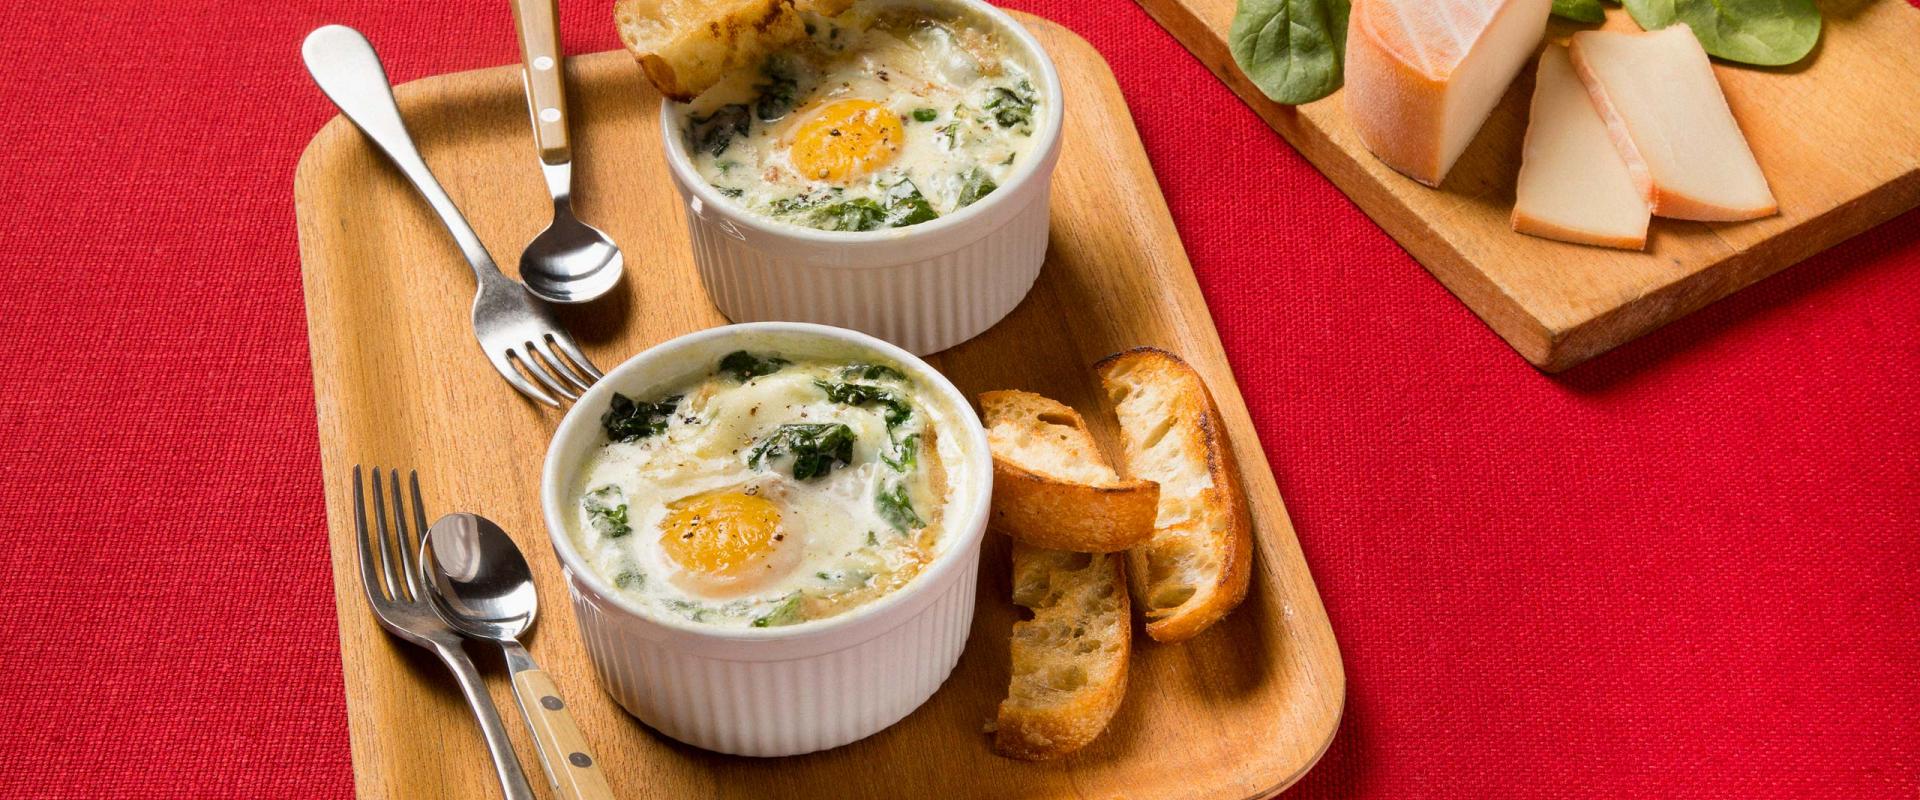 Coddled eggs, spinach and OKA cheese casserole